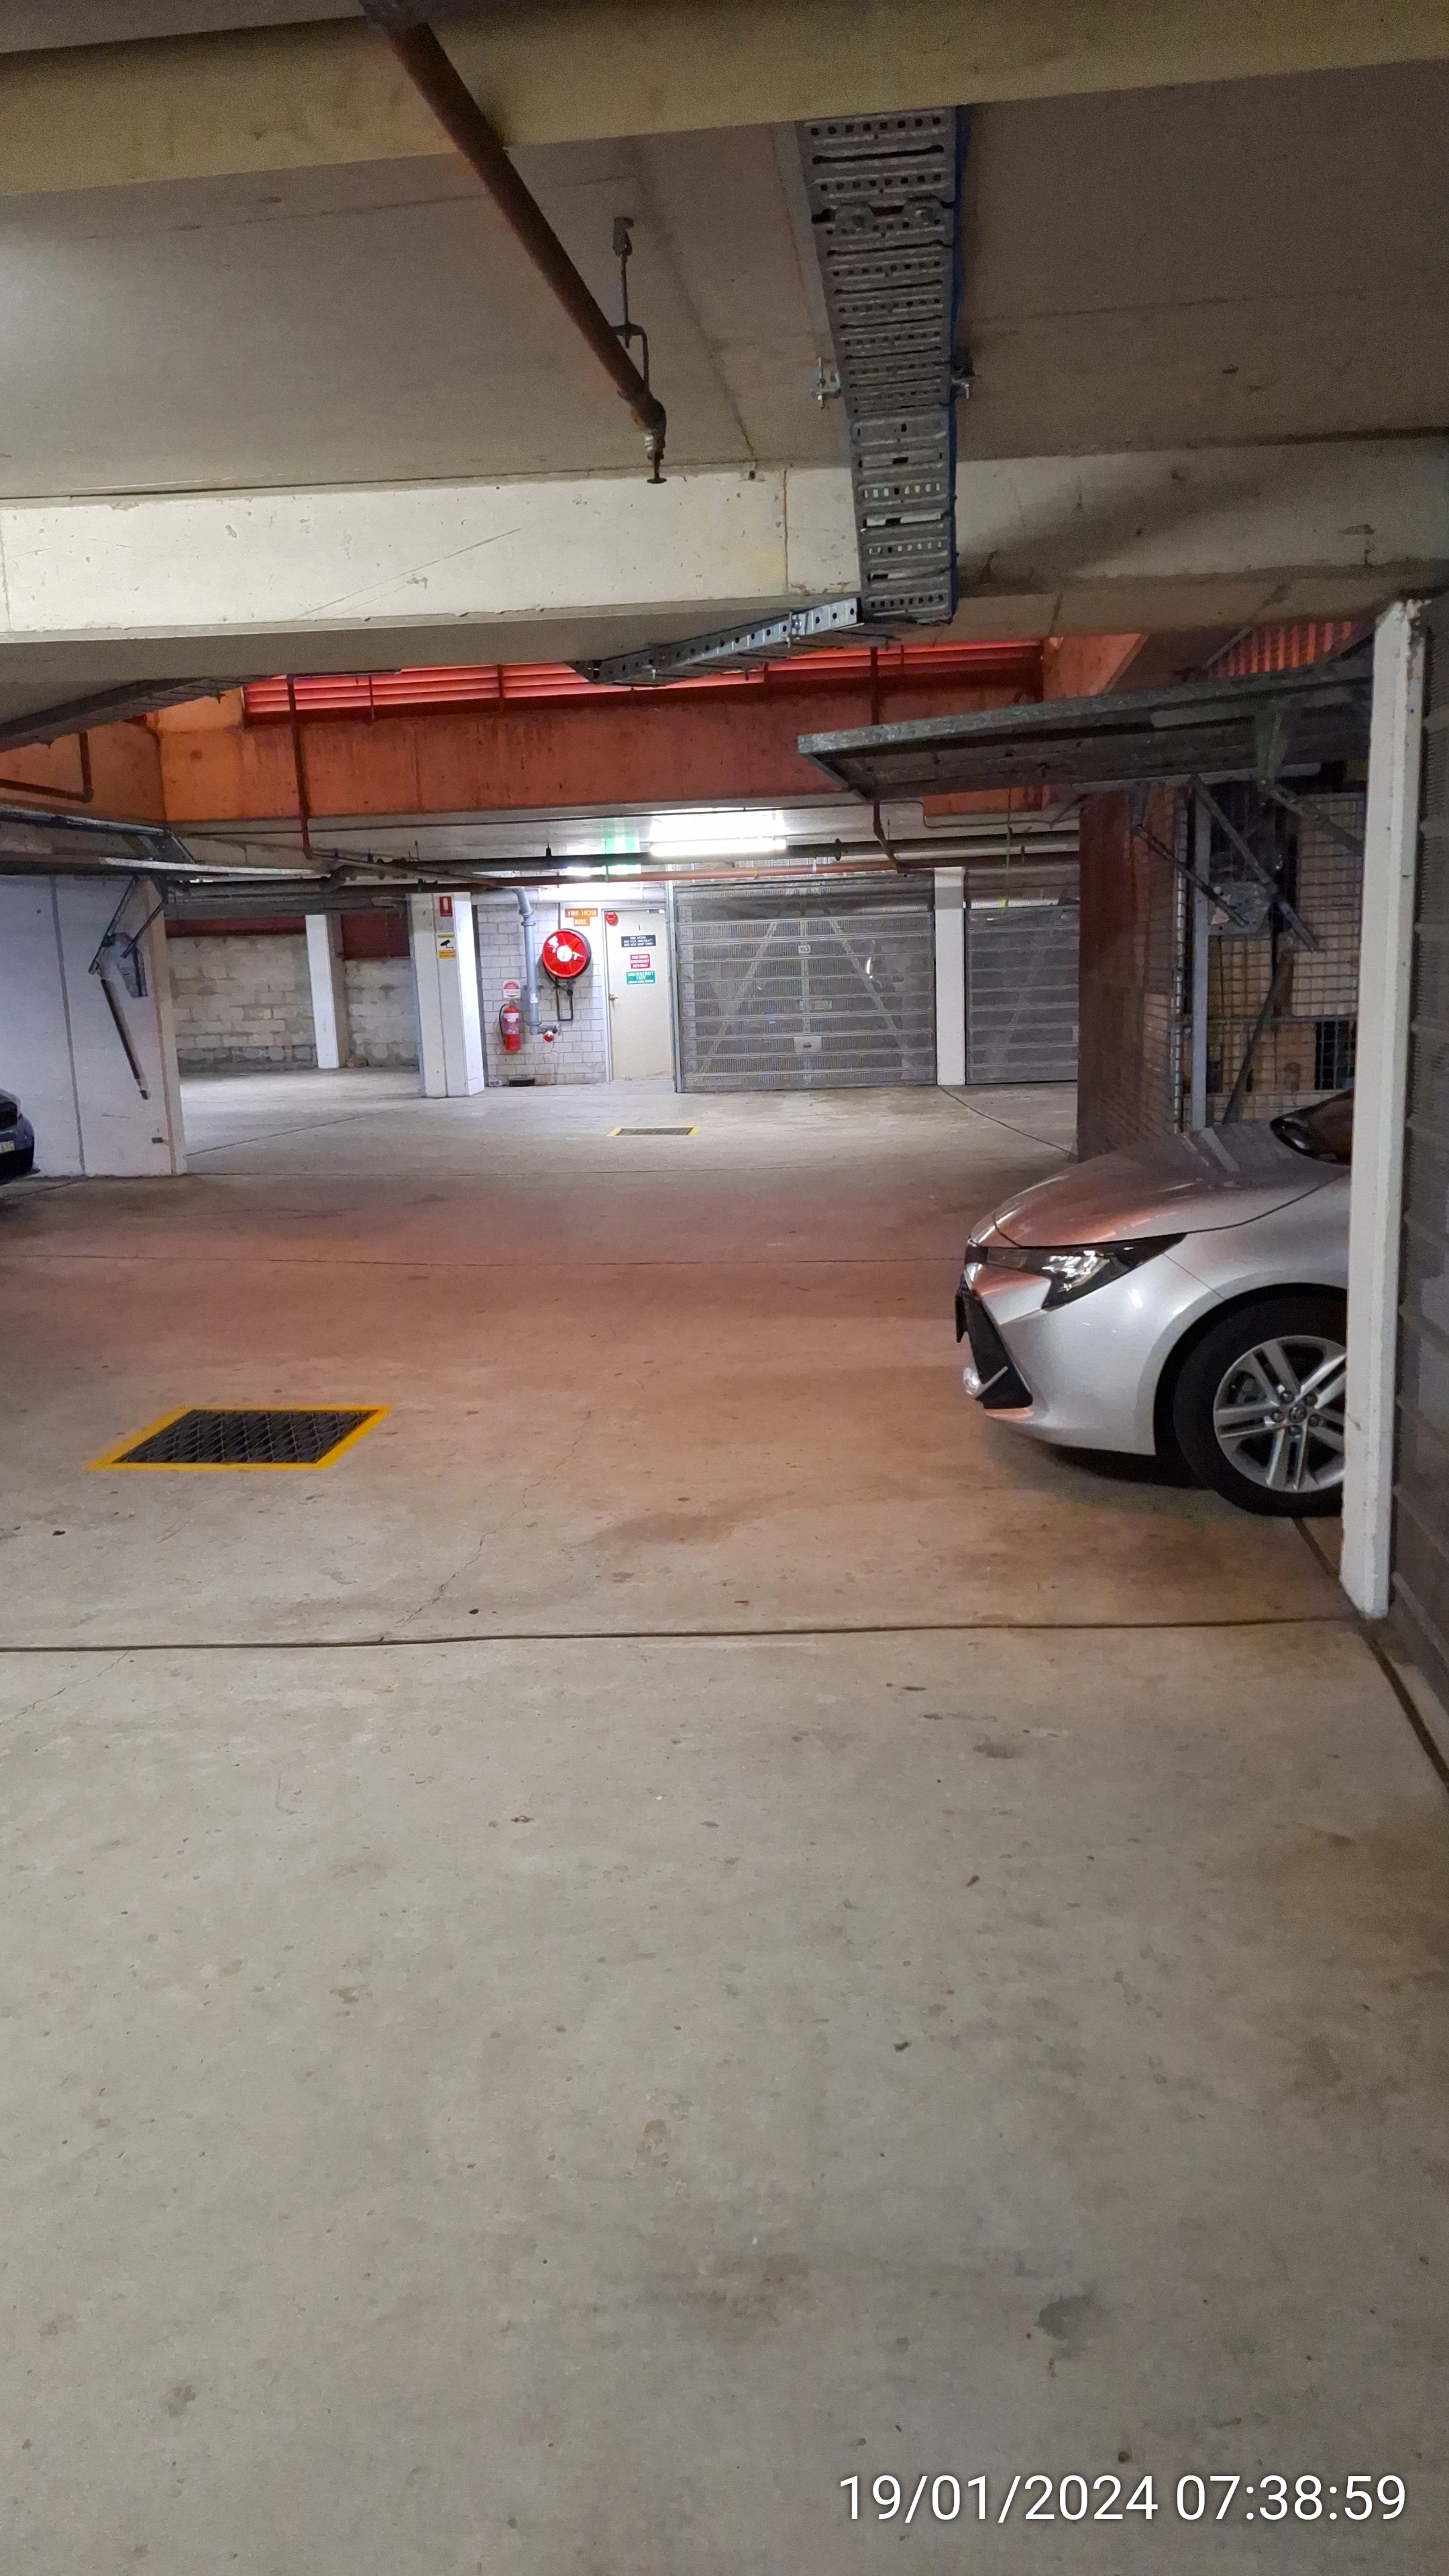 SP52948-basement-car-occupying-common-property-in-front-of-Lot-151-due-to-overloaded-garage-space-photo-1-19Jan2024.webp